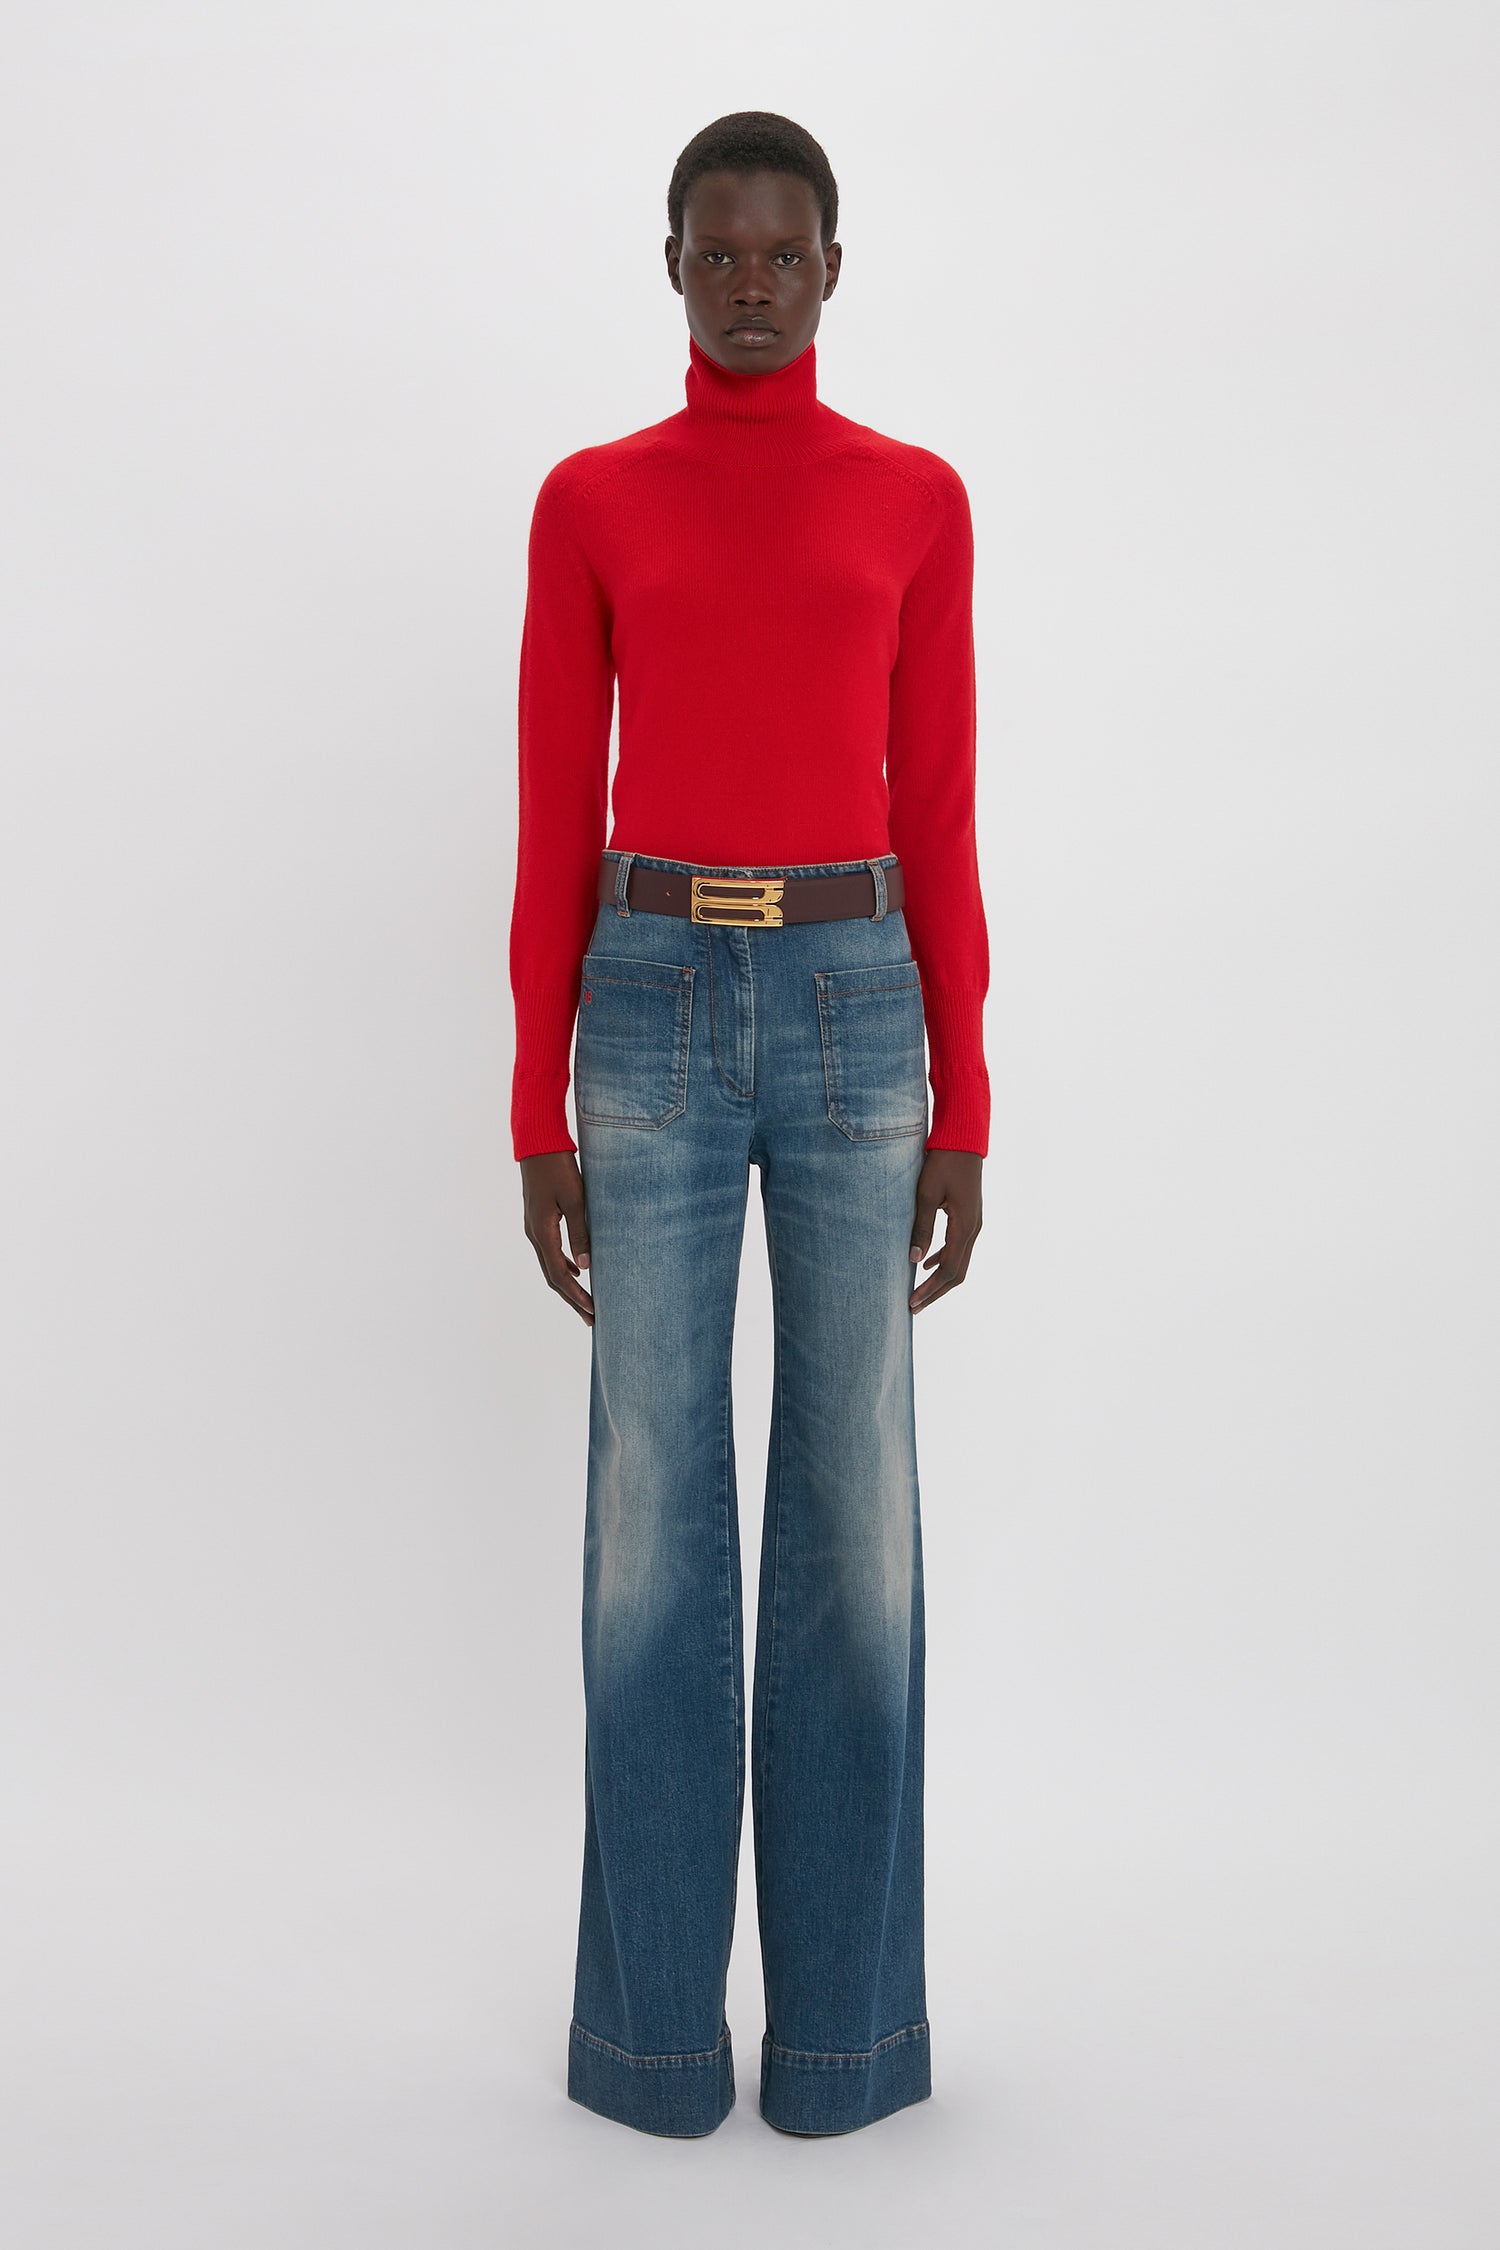 A black woman stands against a white background, wearing a red turtleneck sweater, Victoria Beckham's Alina Jean in Heavy Vintage Indigo Wash, and a brown belt.